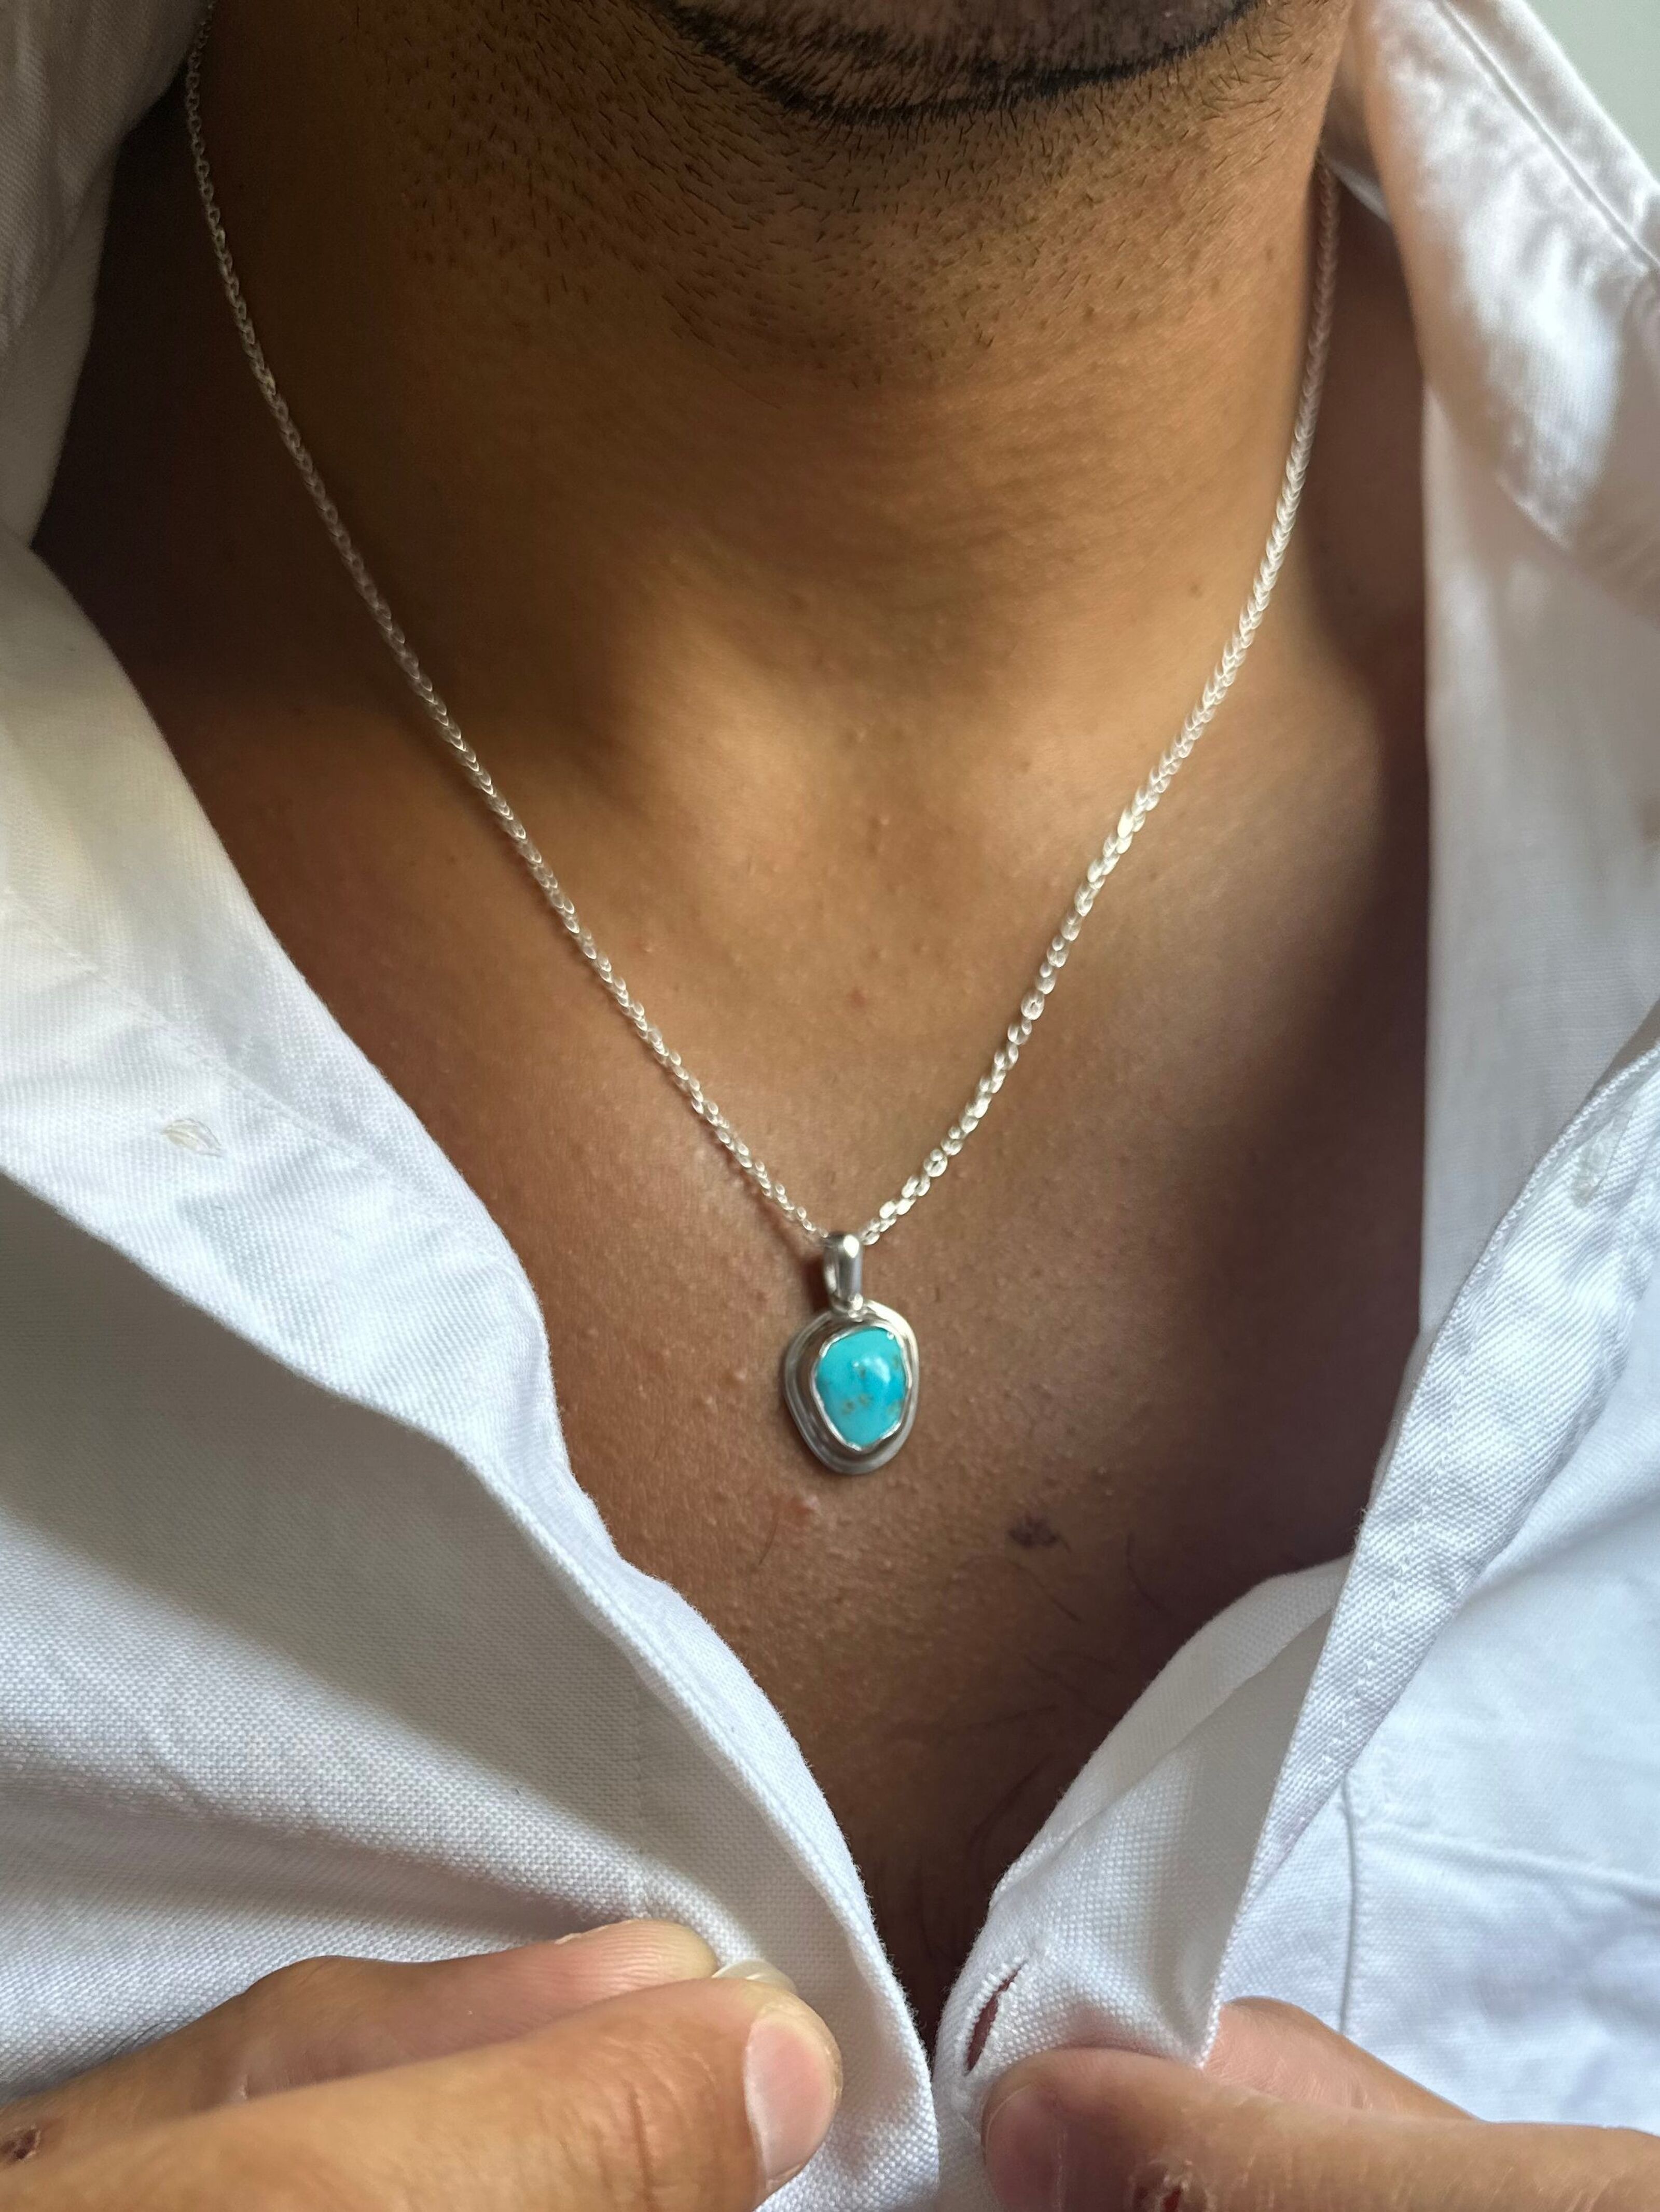 Buy wholesale Real Turquoise Stone Necklace, Pendant Pendant, Made Sterling Chain Men\'s Men, SIlver Necklace Men, Turquoise from Silver